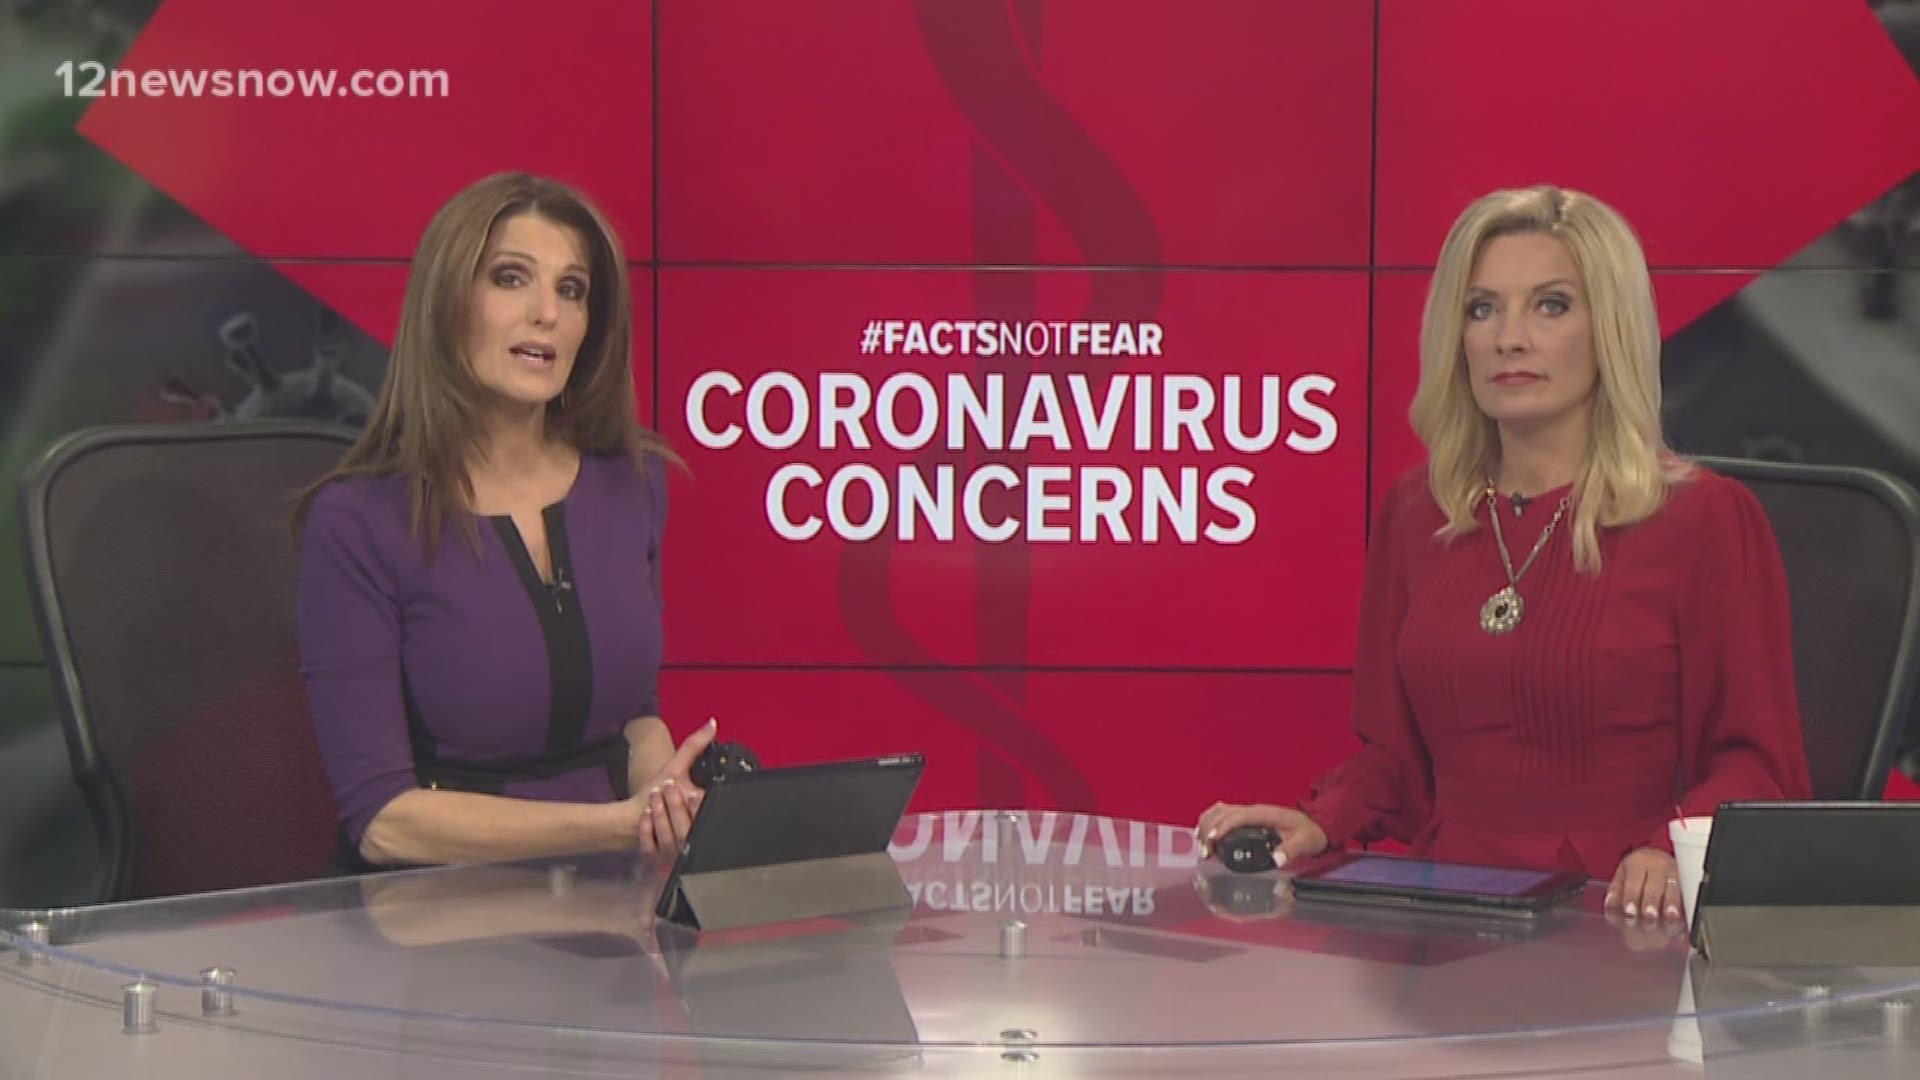 The concern over the coronavirus is growing after a second reported death in Washington State. Meanwhile, more cases are starting to appear in other states.